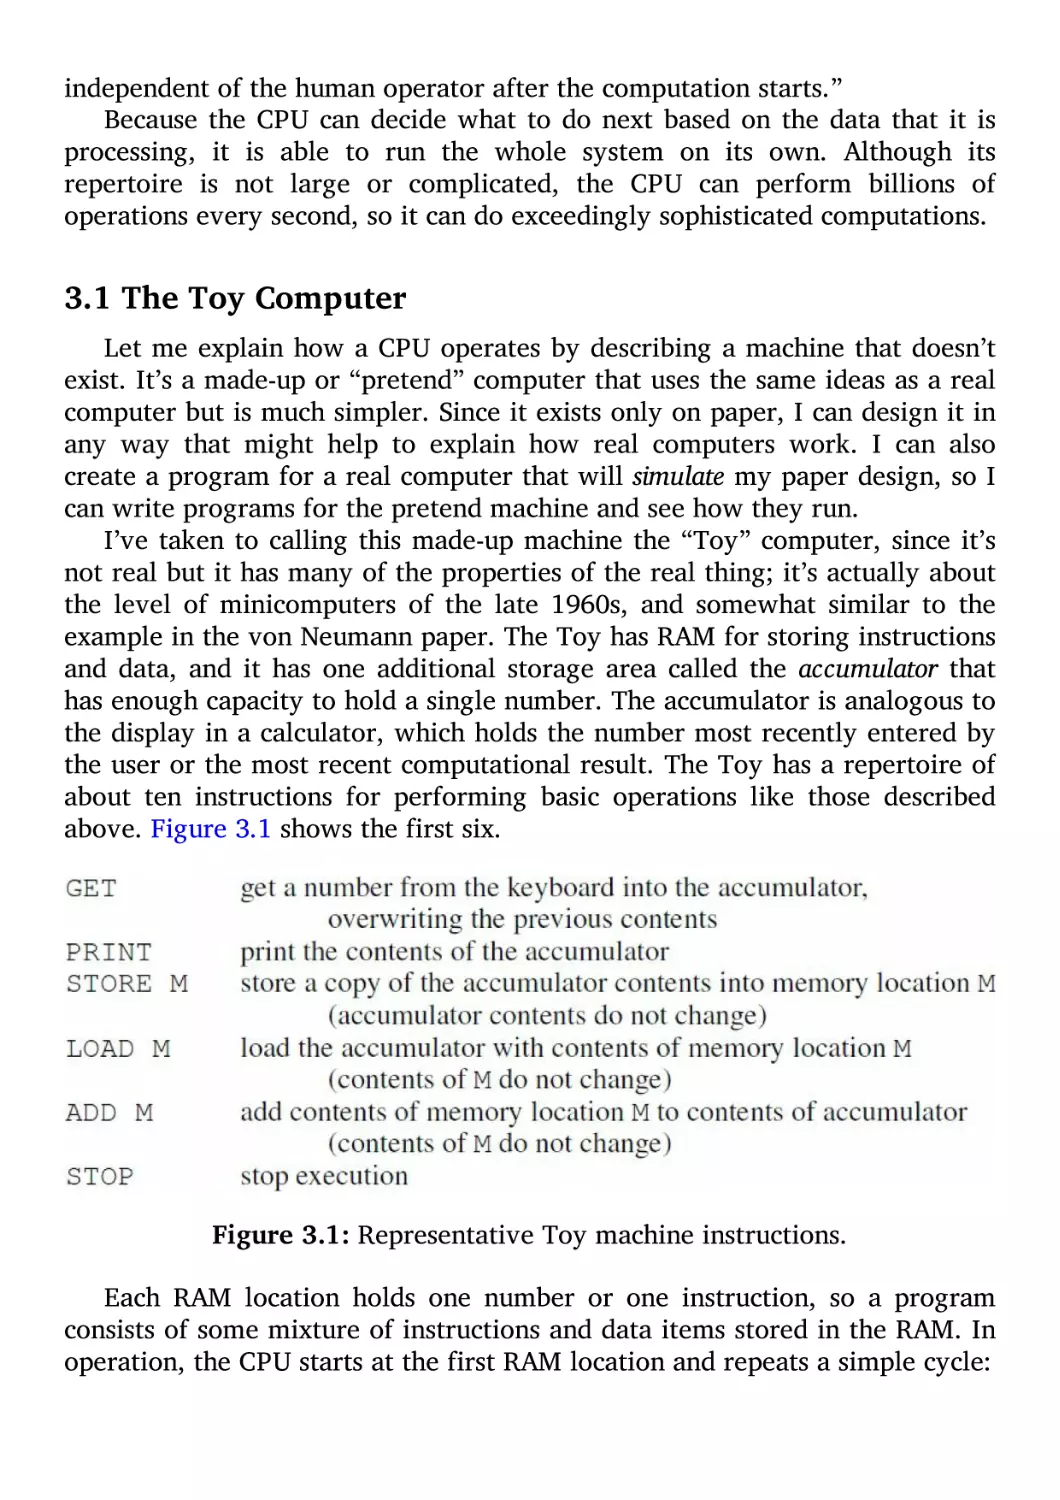 3.1 The Toy Computer